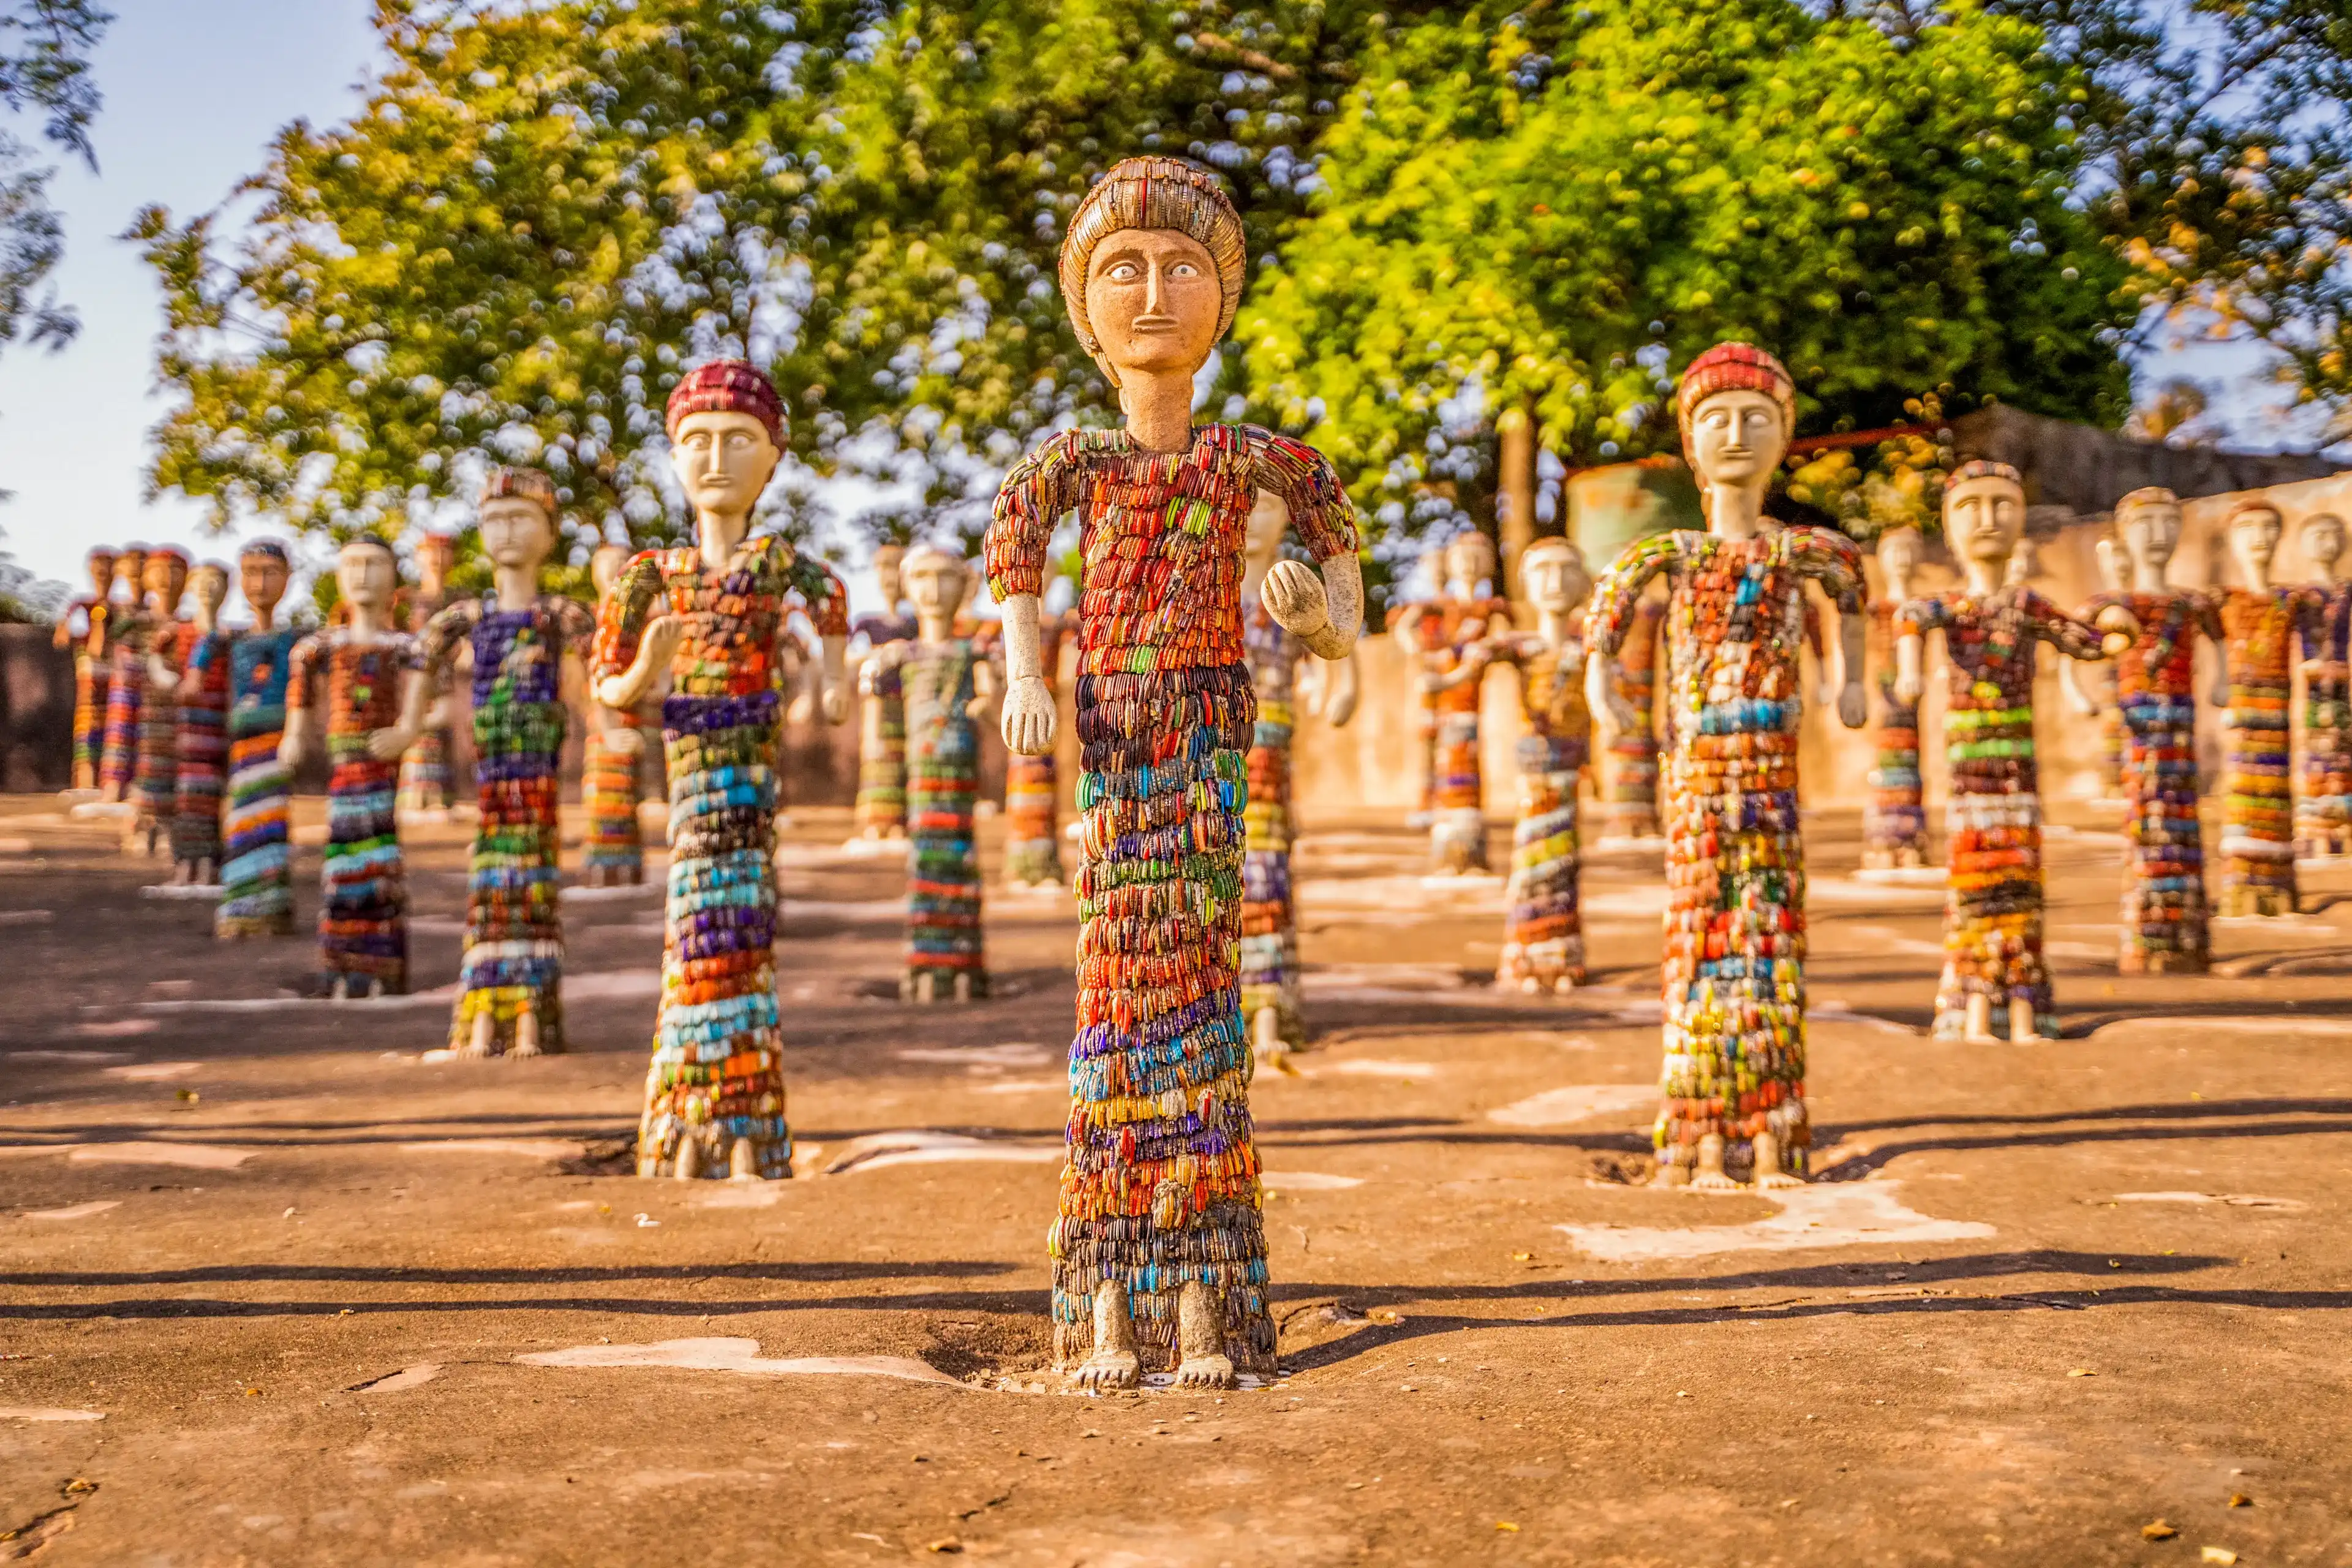 CHANDIGARH / INDIA - December 03, 2019: The Rock Garden of Chandigarh is a sculpture garden in Chandigarh, India. It is also known as Nek Chand's Rock Garden after its founder Nek Chand Saini,